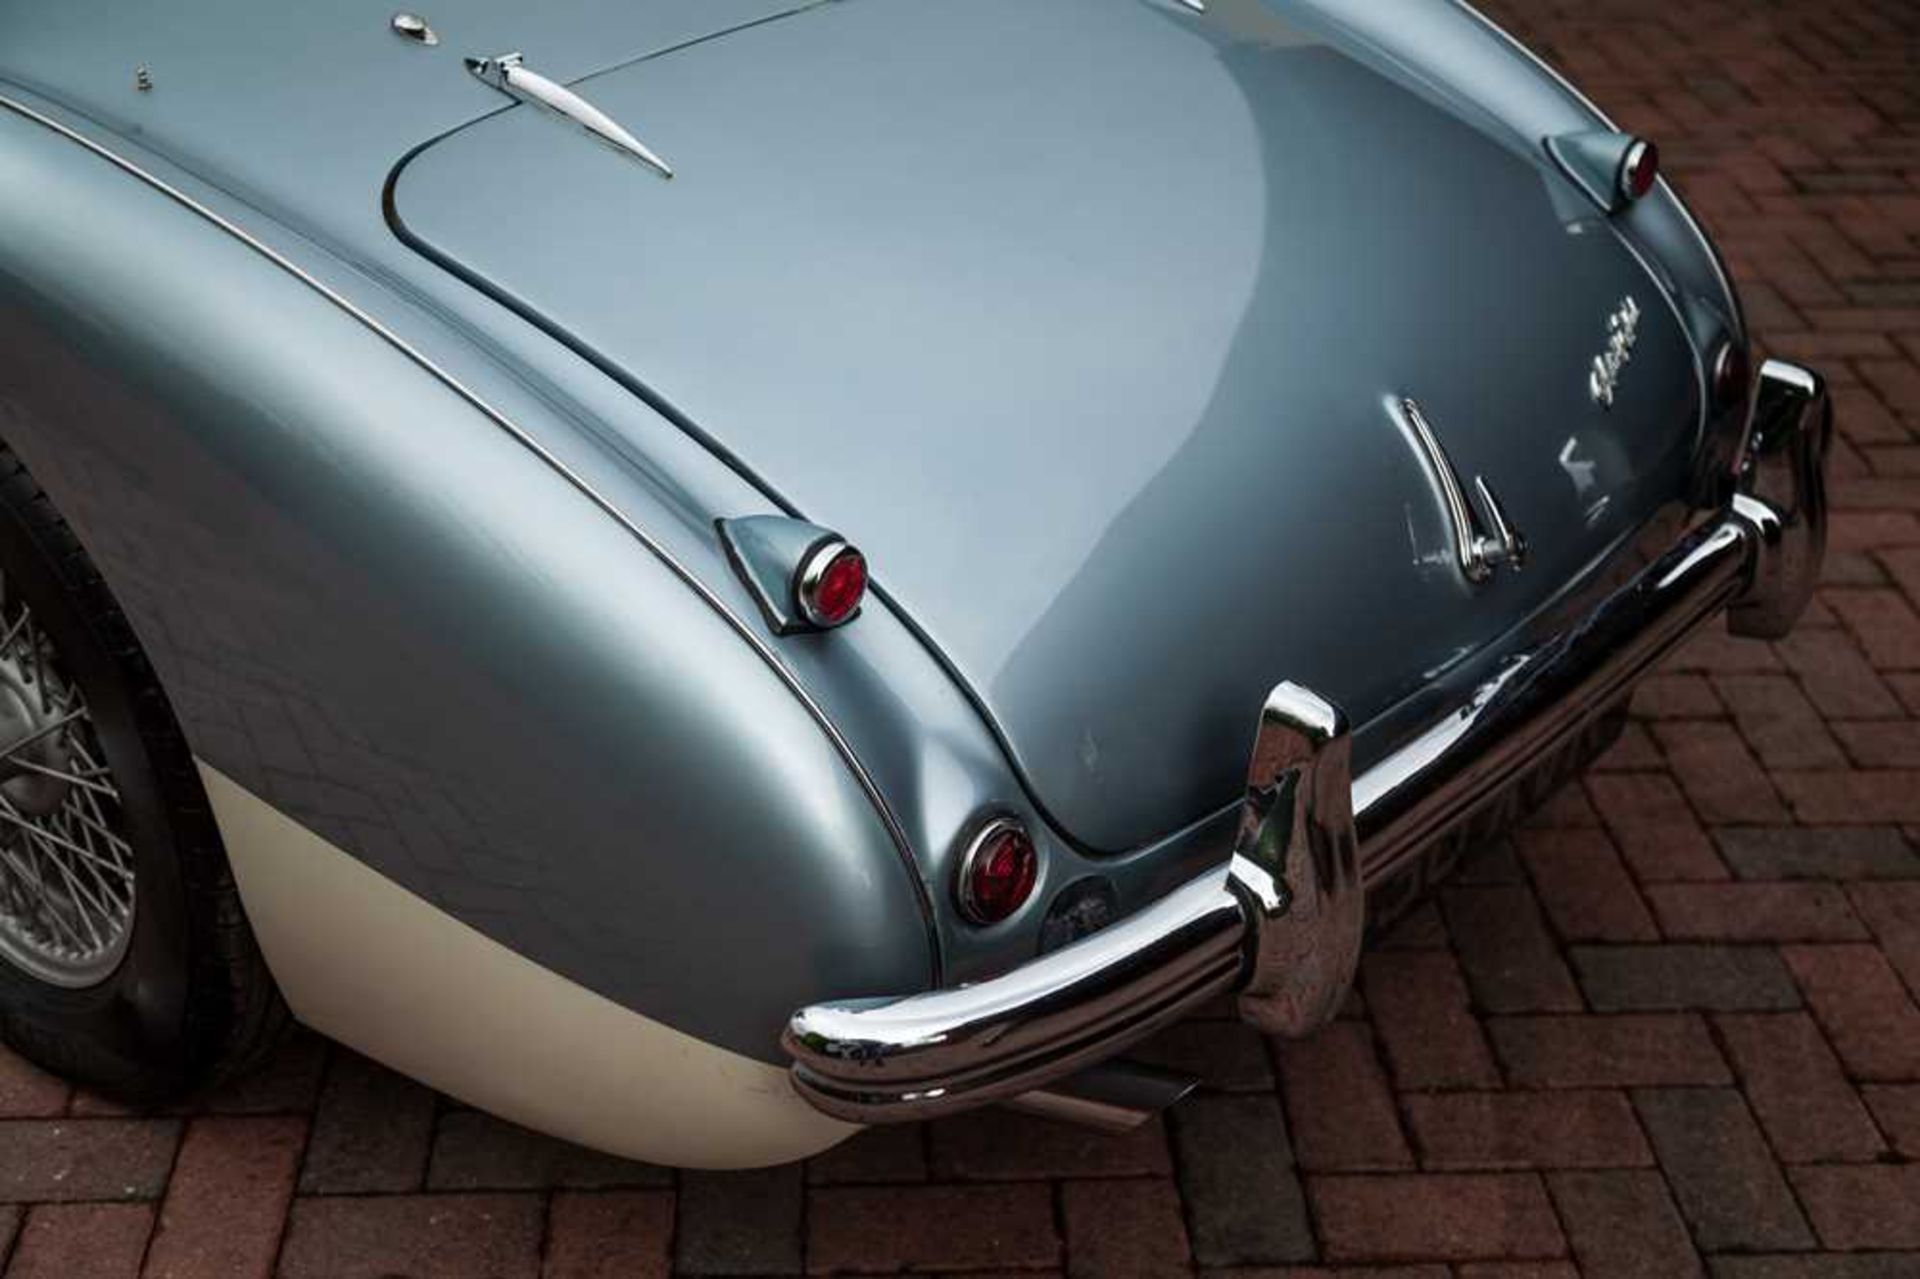 1955 Austin-Healey 100/4 Subtly Upgraded with 5-Speed Transmission and Front Disc Brakes - Image 44 of 54